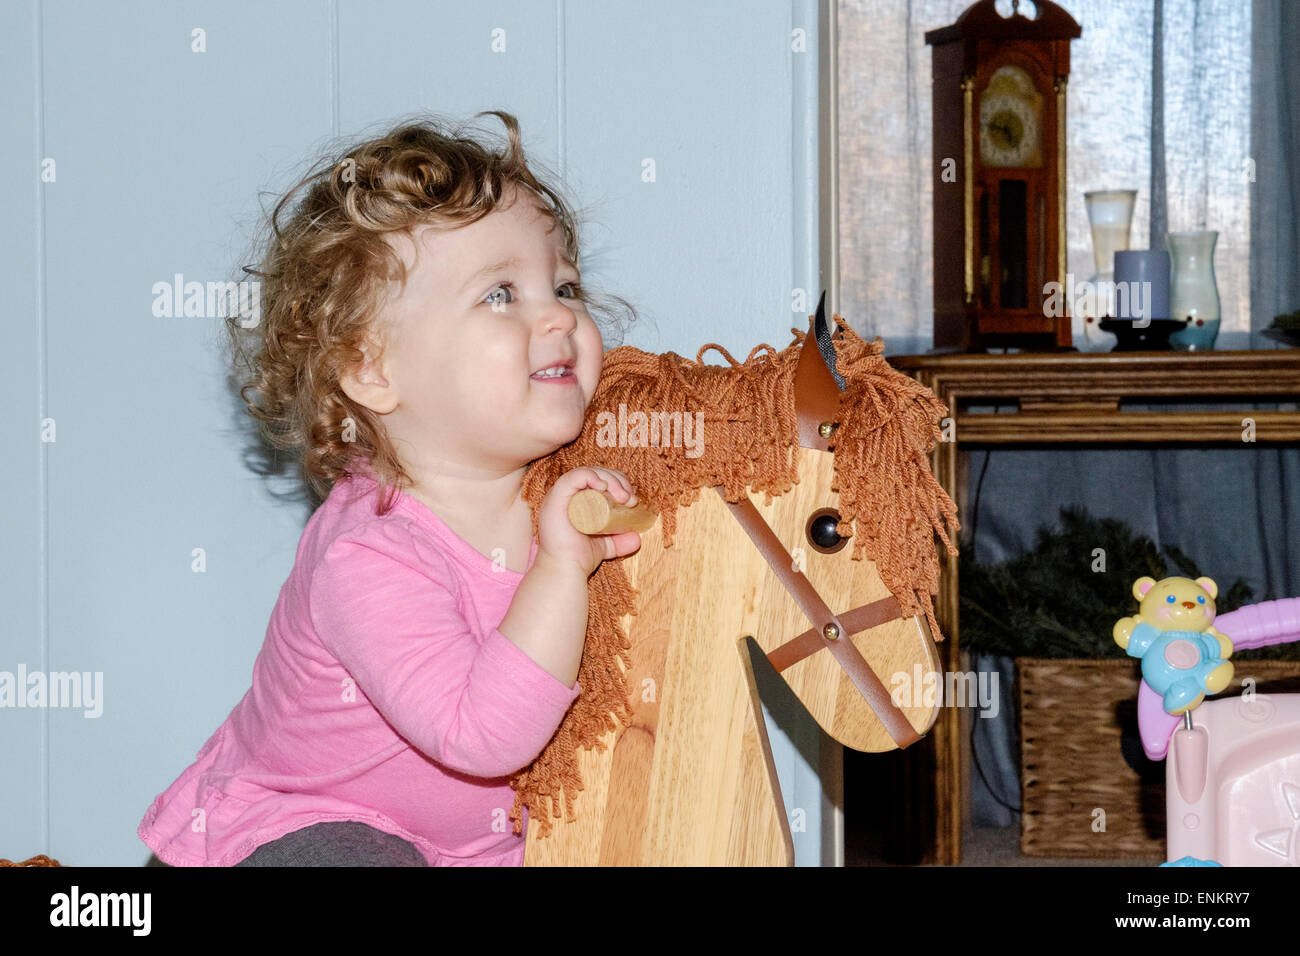 A 10 month old baby girl laughs while riding her wooden rocking horse. Stock Photo